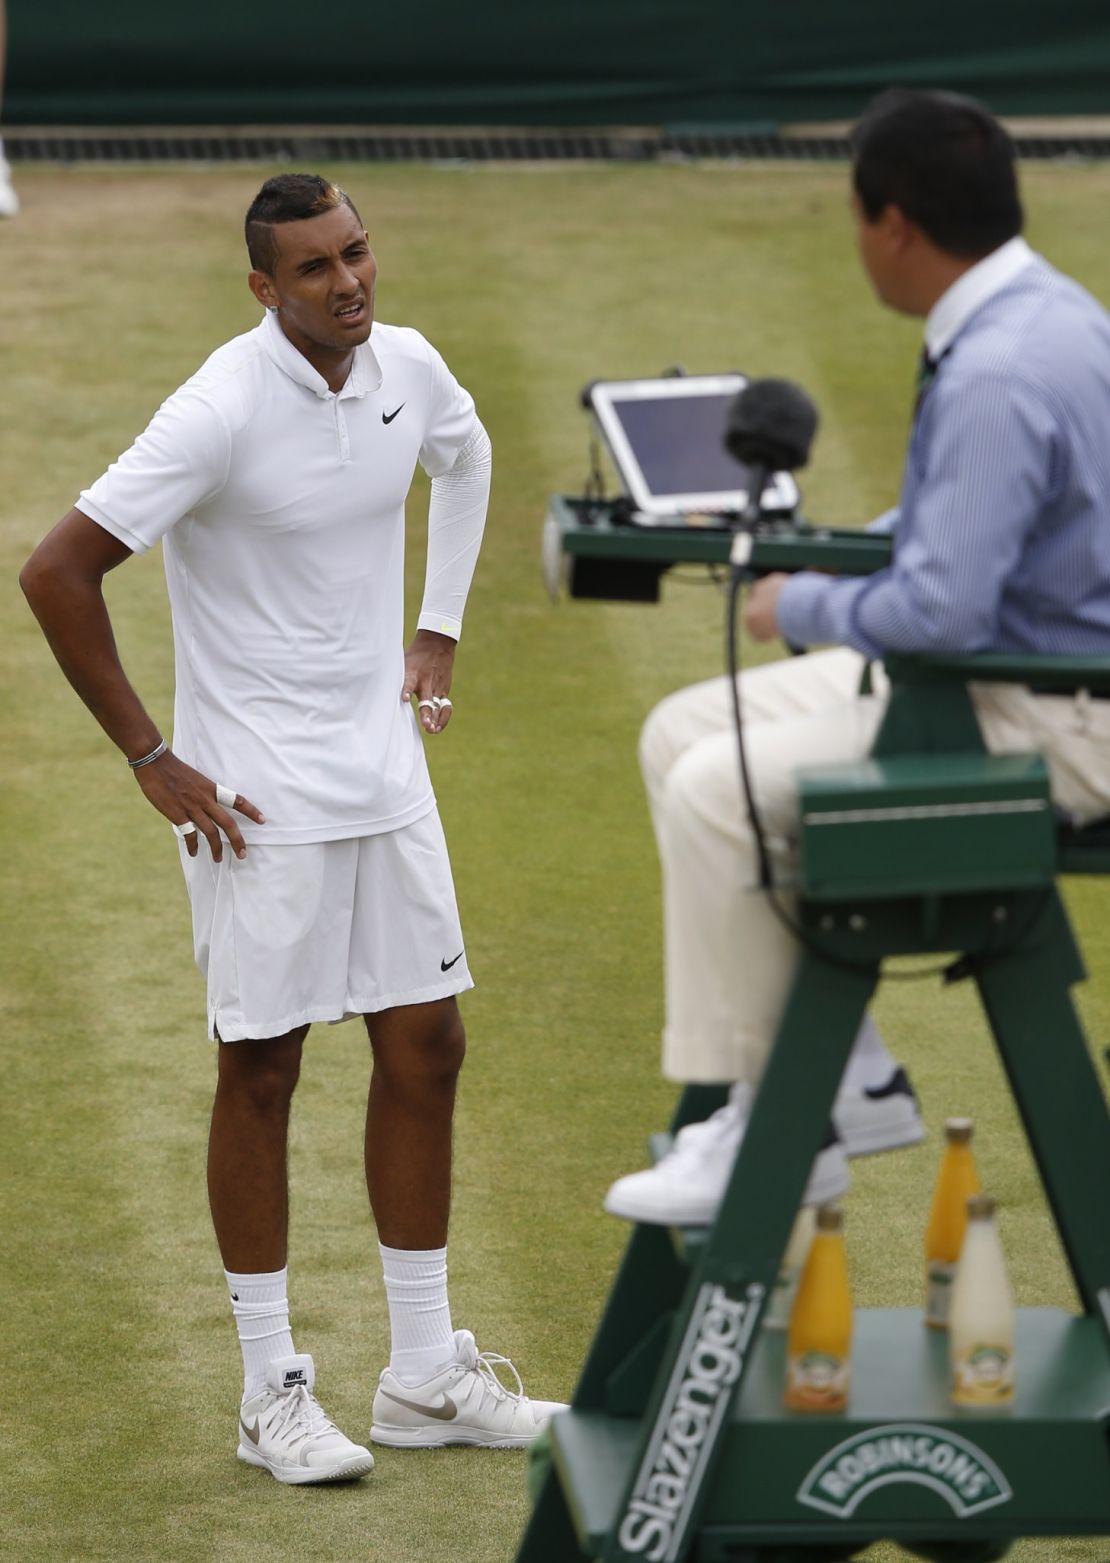 Australia's Nick Kyrgios argues a line call with the umpire during a Wimbledon match. 